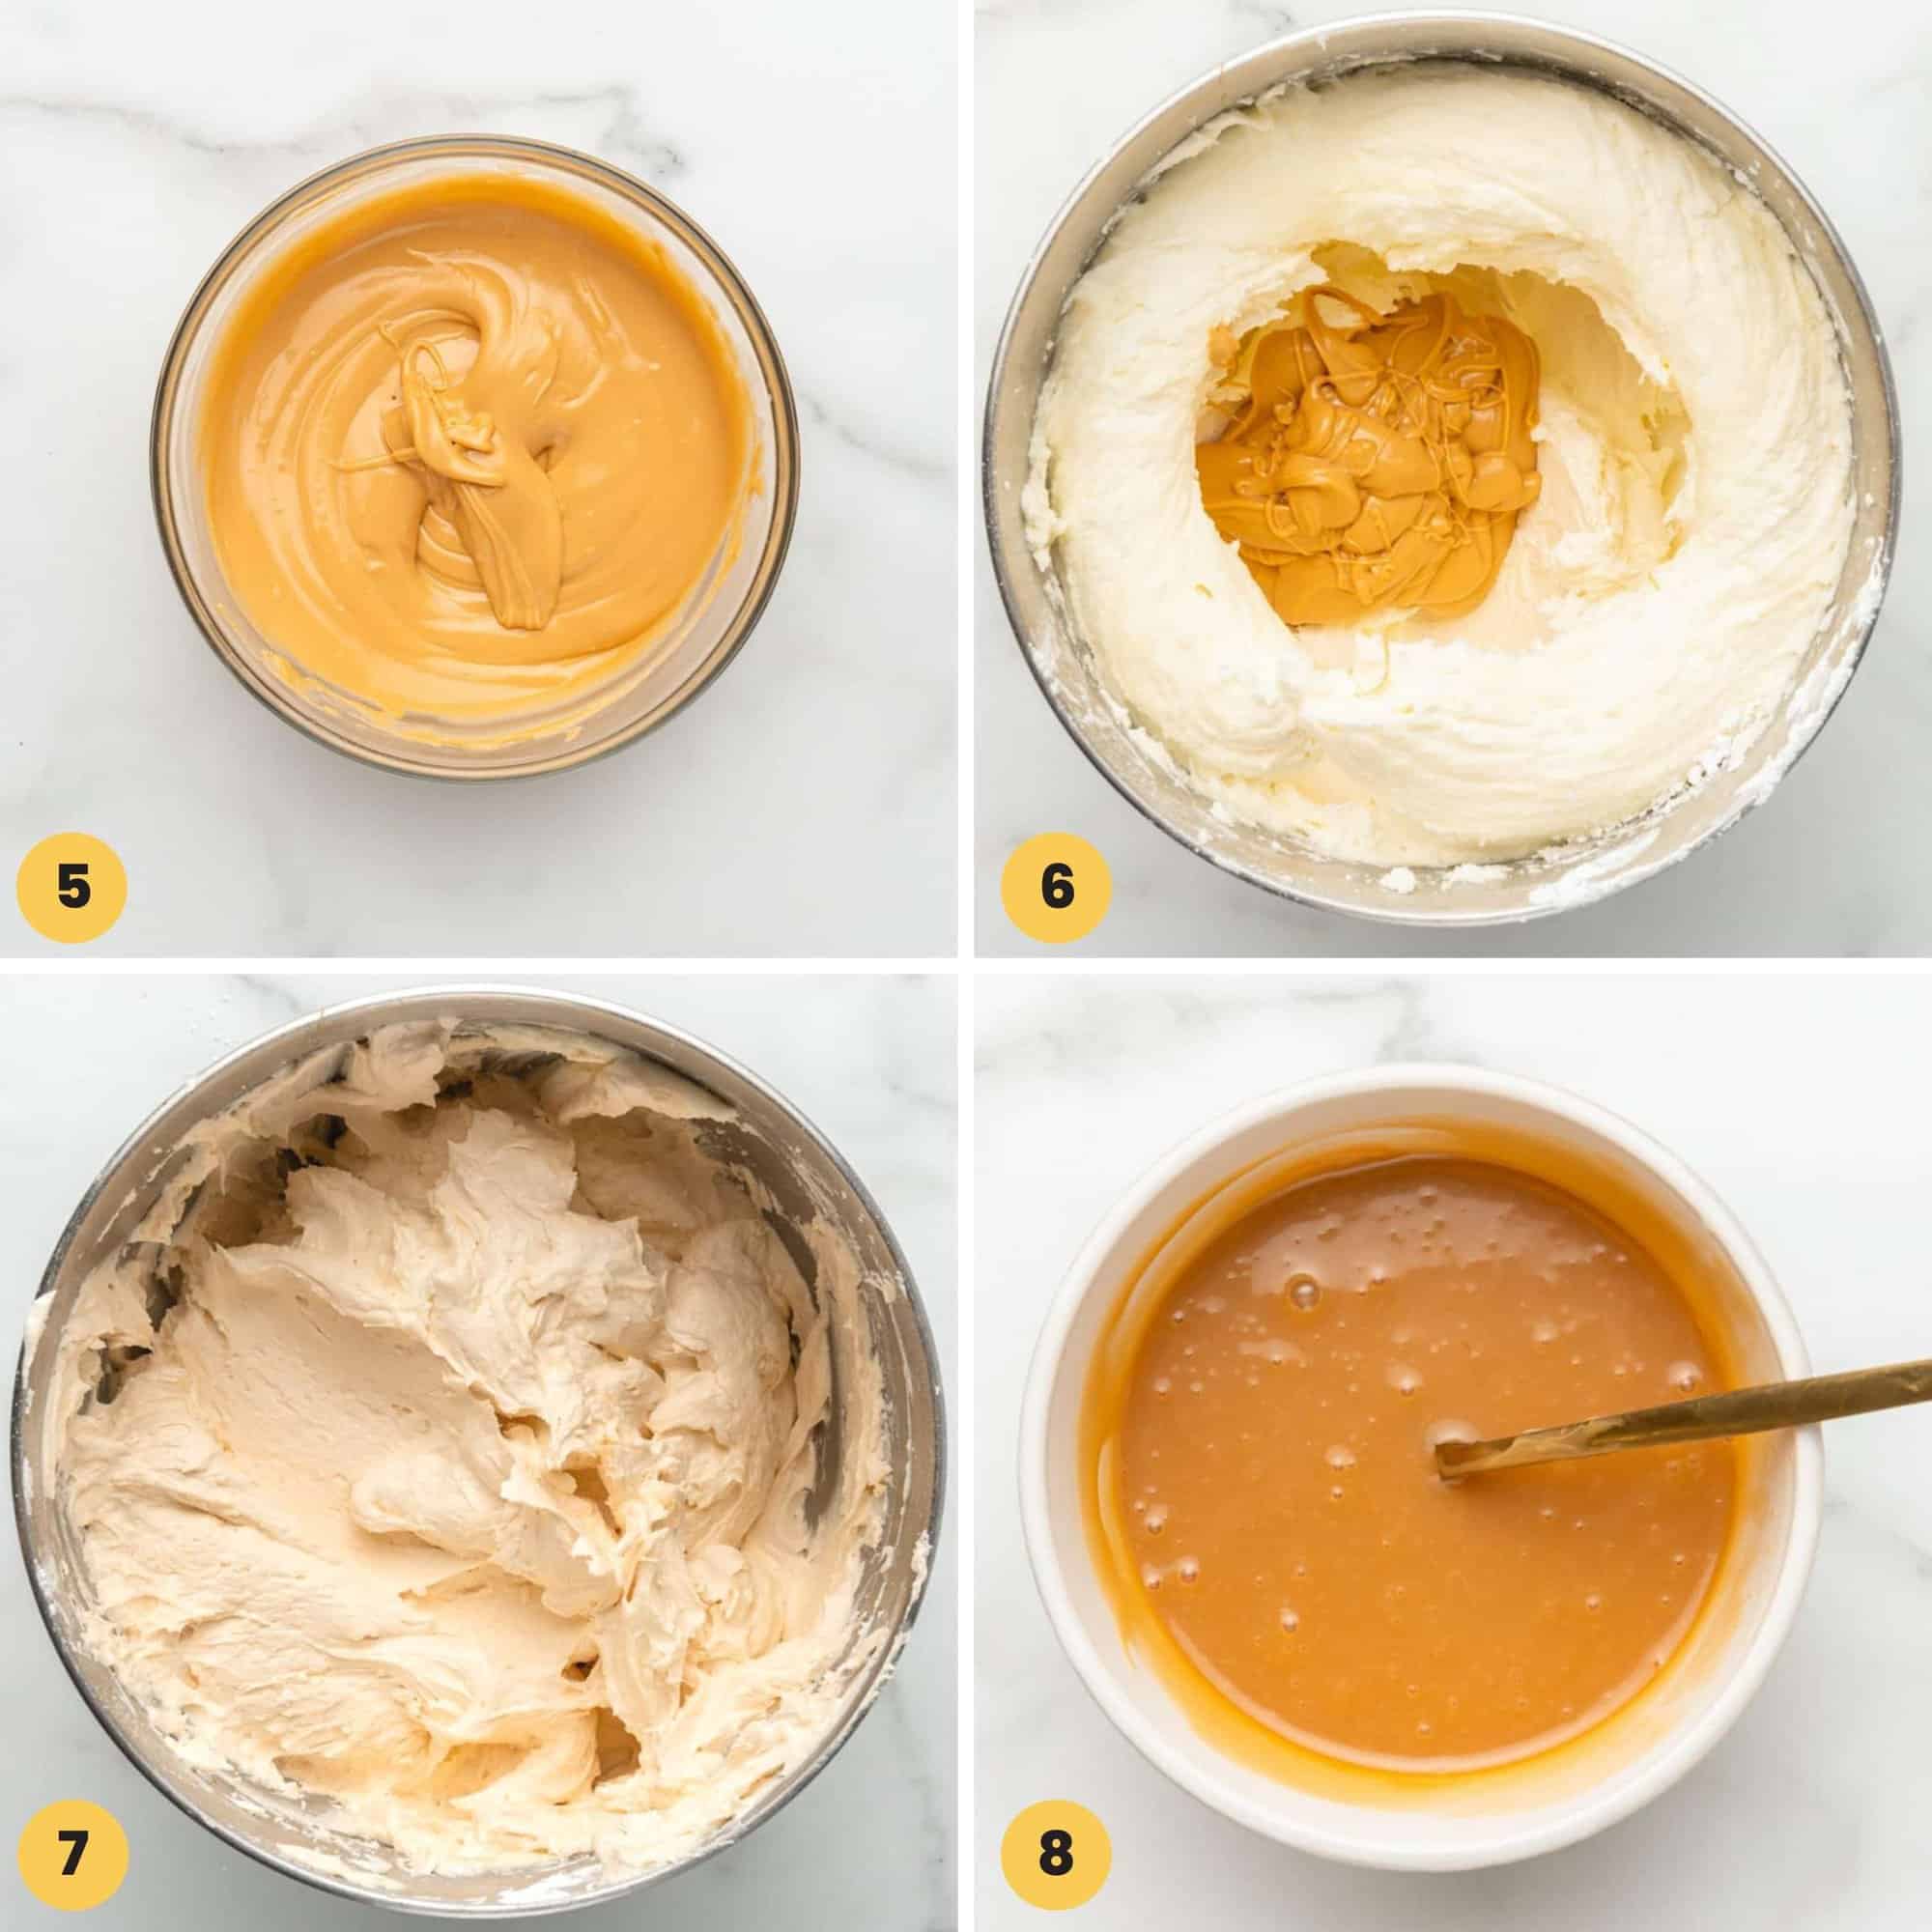 four images showing the steps for making butterscotch frosting.